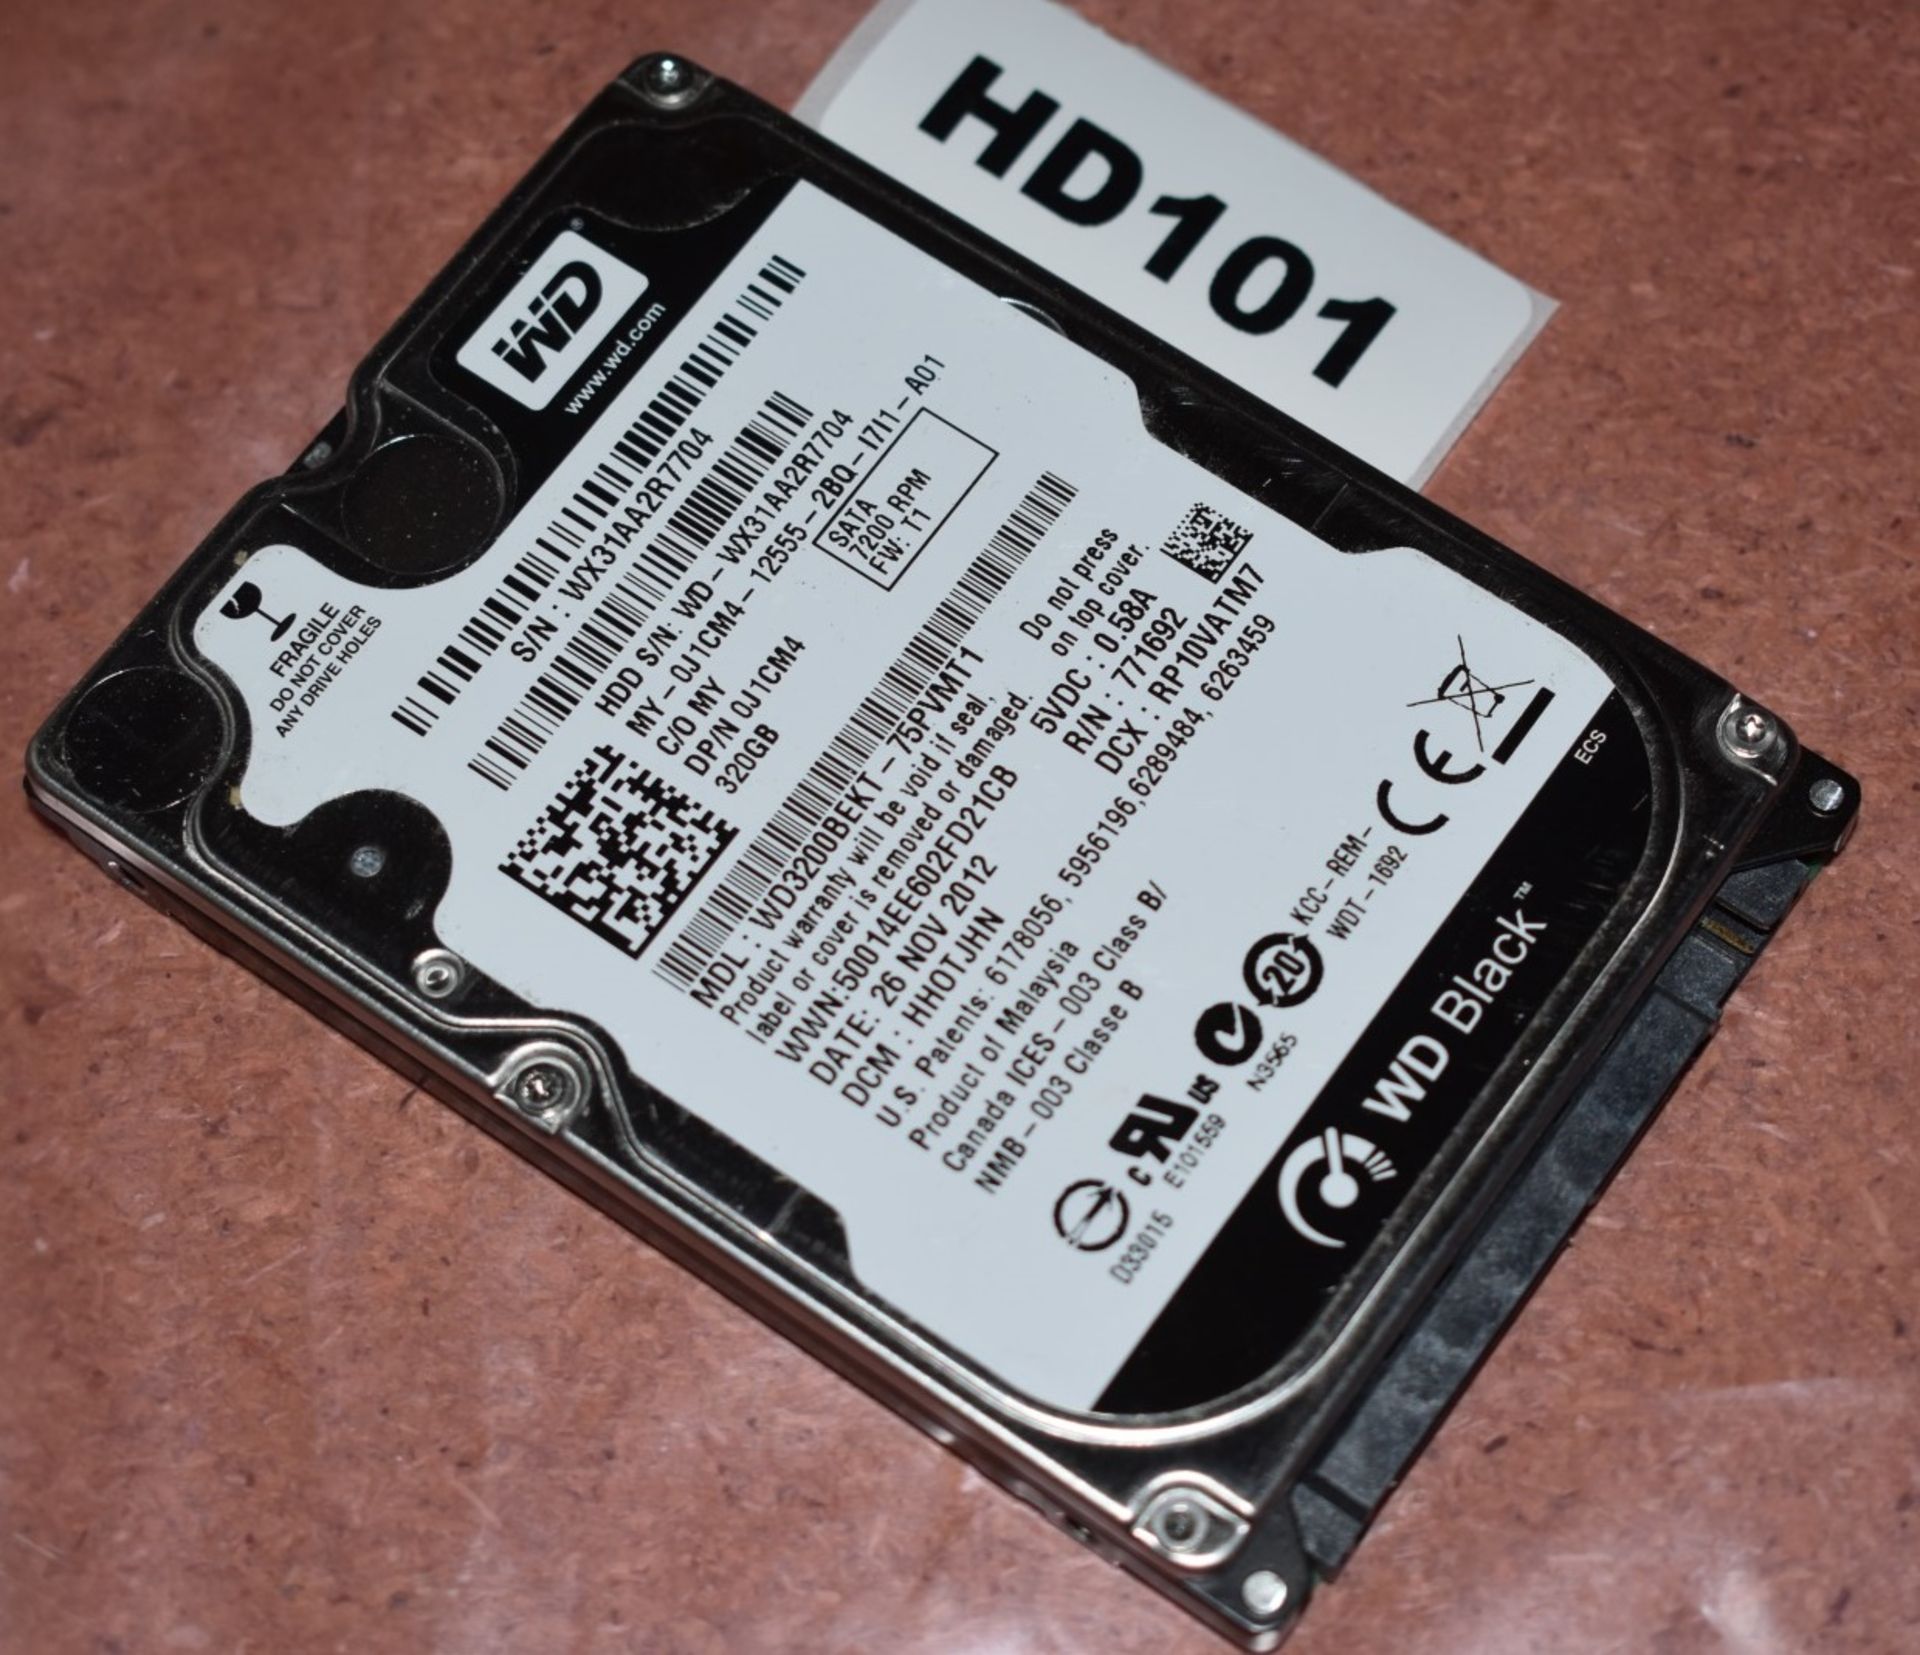 1 x Western Digital 320gb Black 2.5 Inch SATA Hard Drive - Tested and Formatted - HD101 - CL011 -